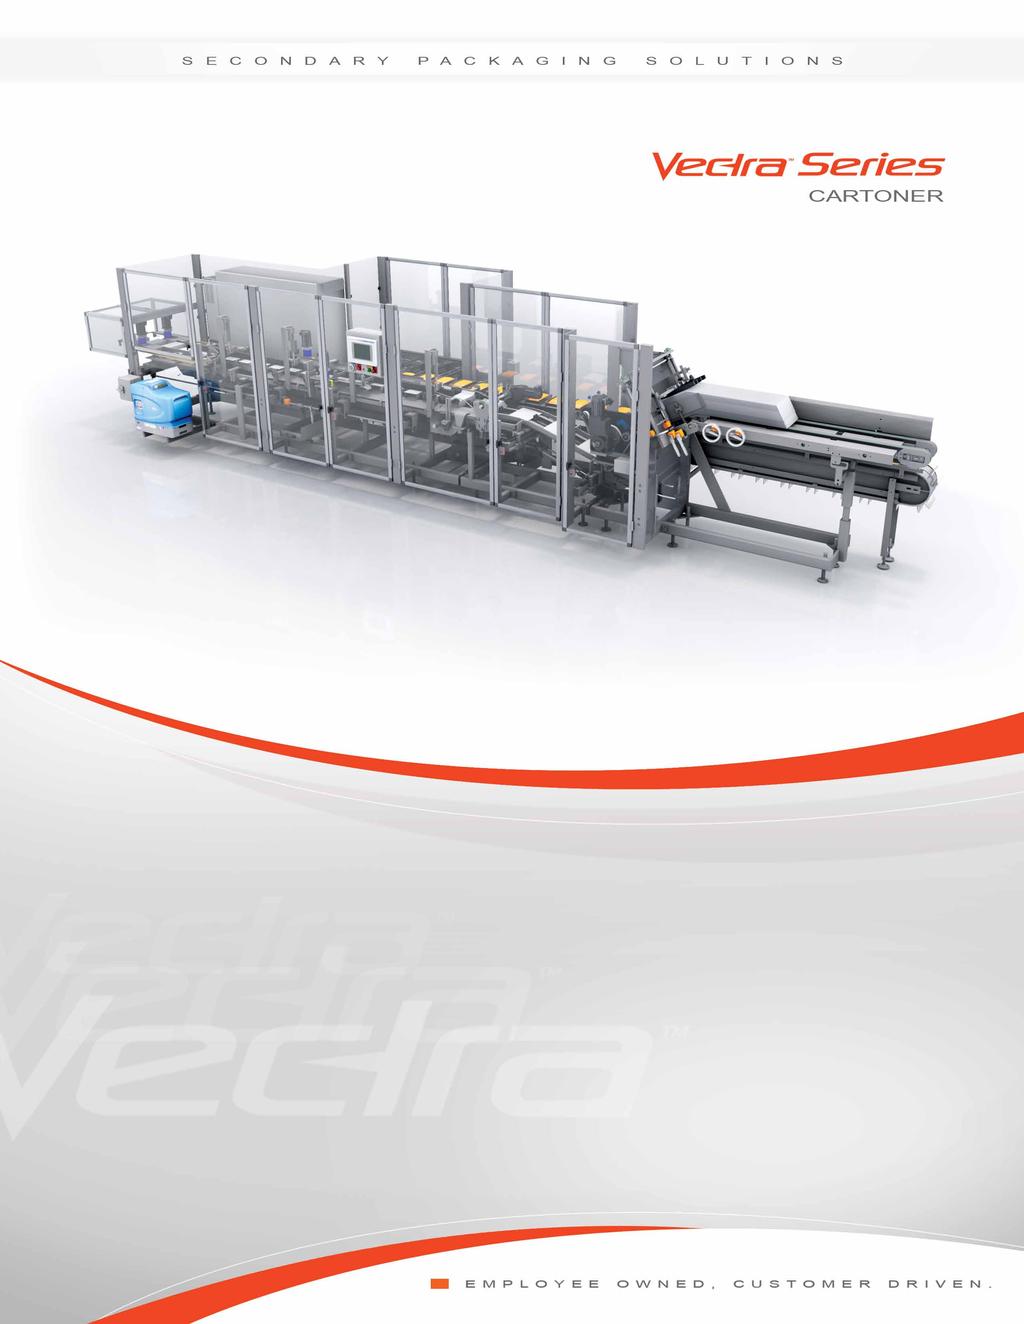 Built to exacting Douglas Machine standards, the flexible platform of the Vectra TM servo cartoner allows for either continuous or intermittent motion operation based on application requirements.